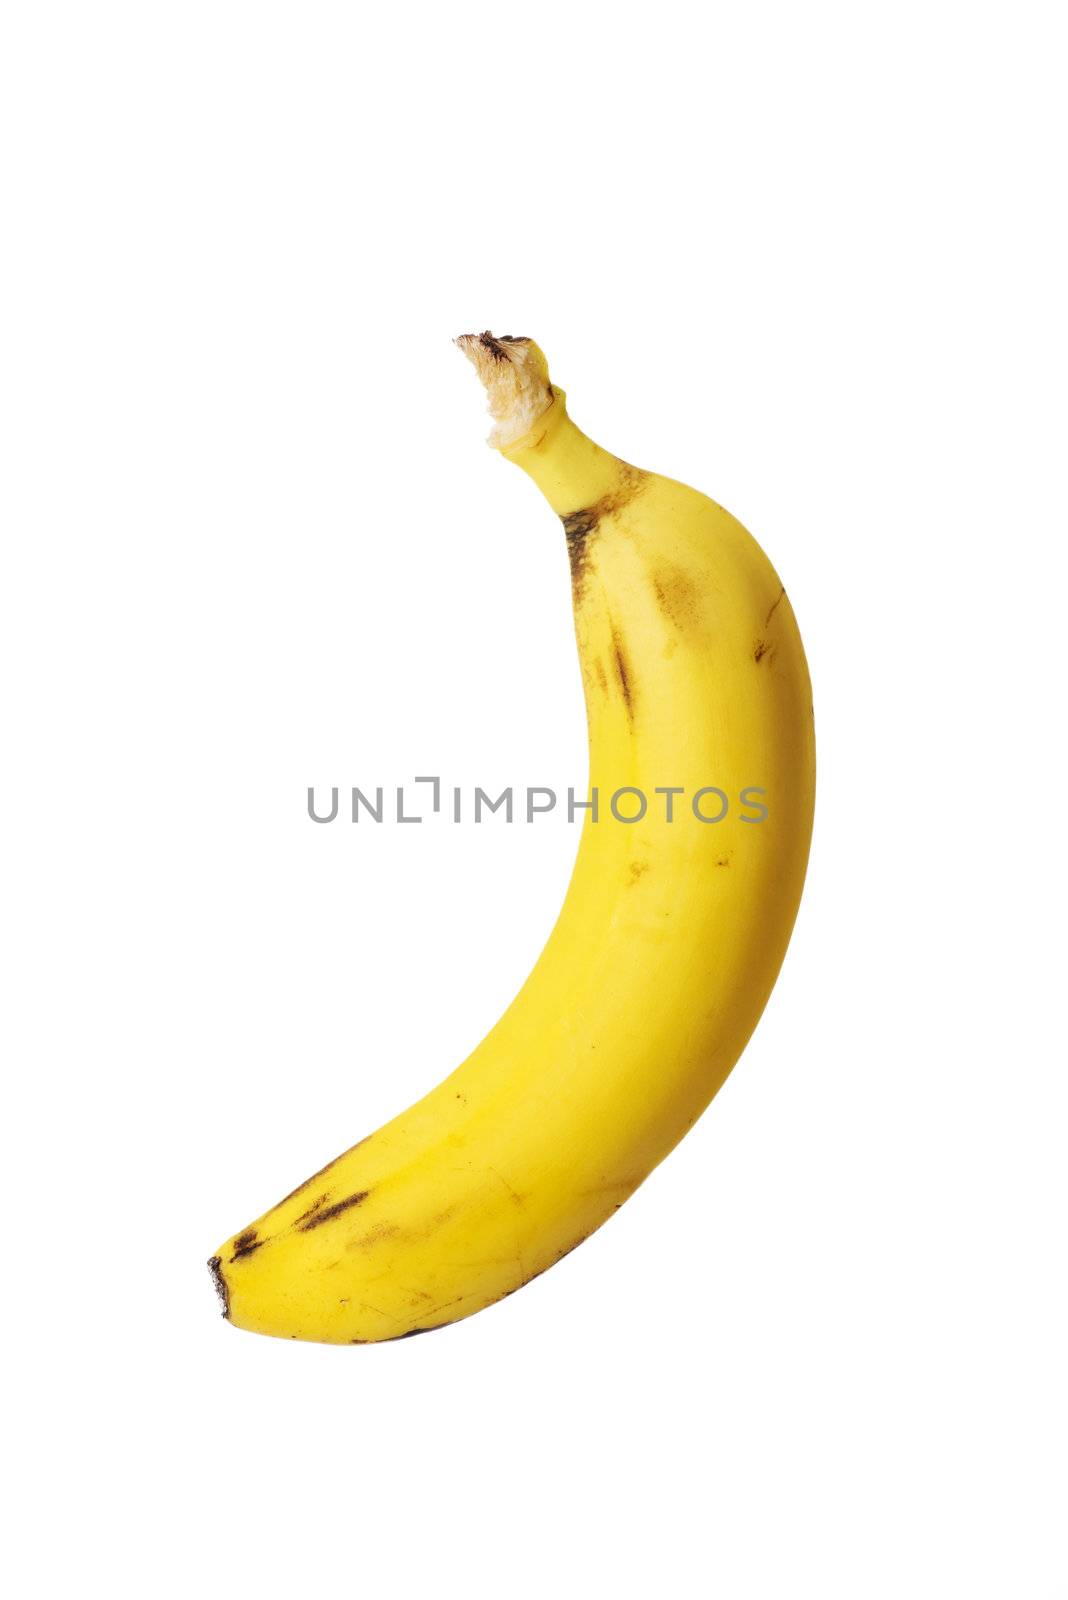 Ripe banana by BDS